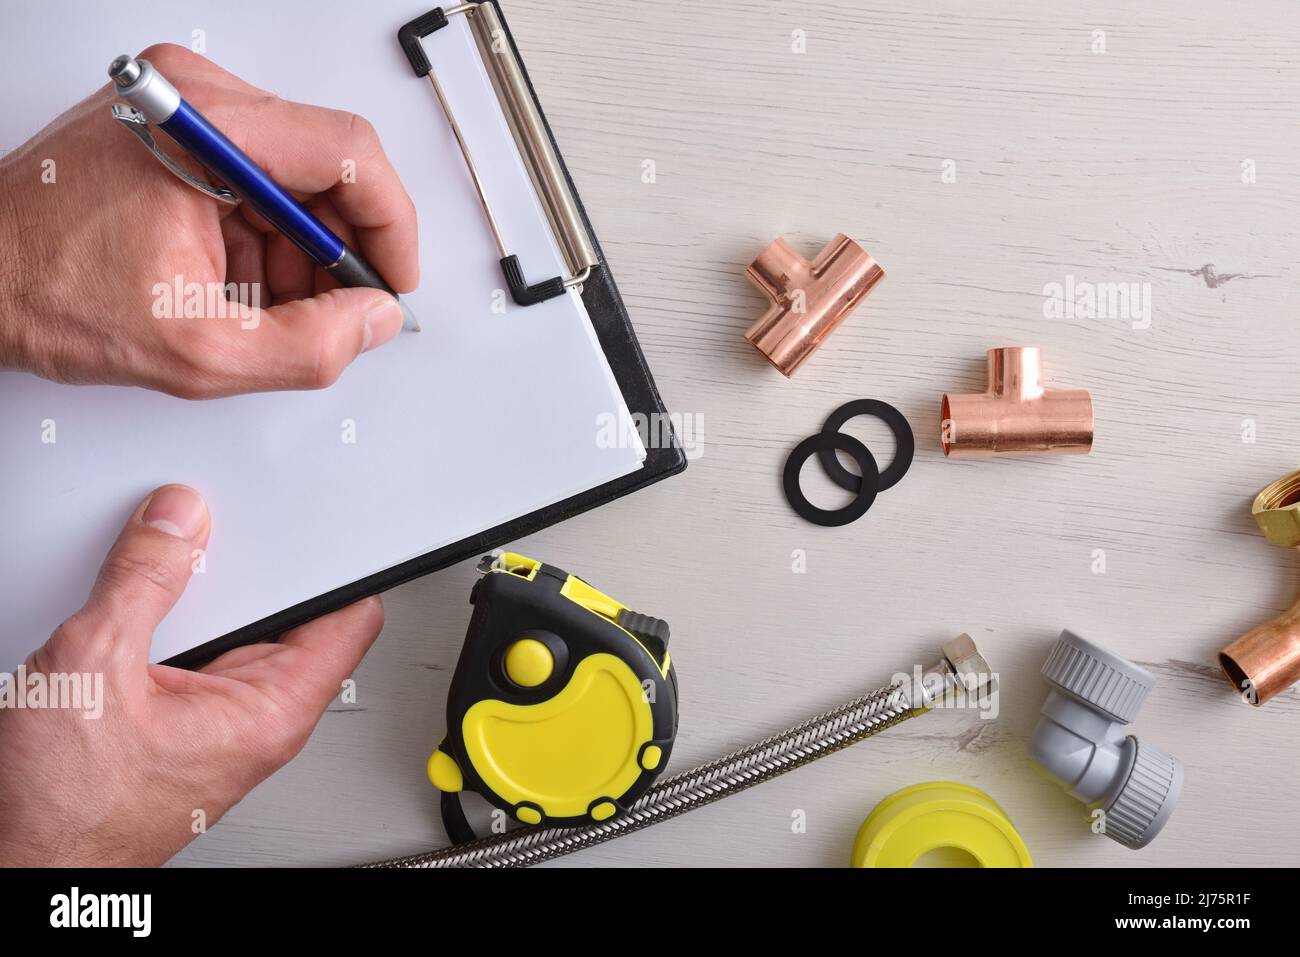 Review and preparation of plumbing material for a job with hands pointing on a notepad and plumbing material on a wooden table. Top view. Horizontal c Stock Photo